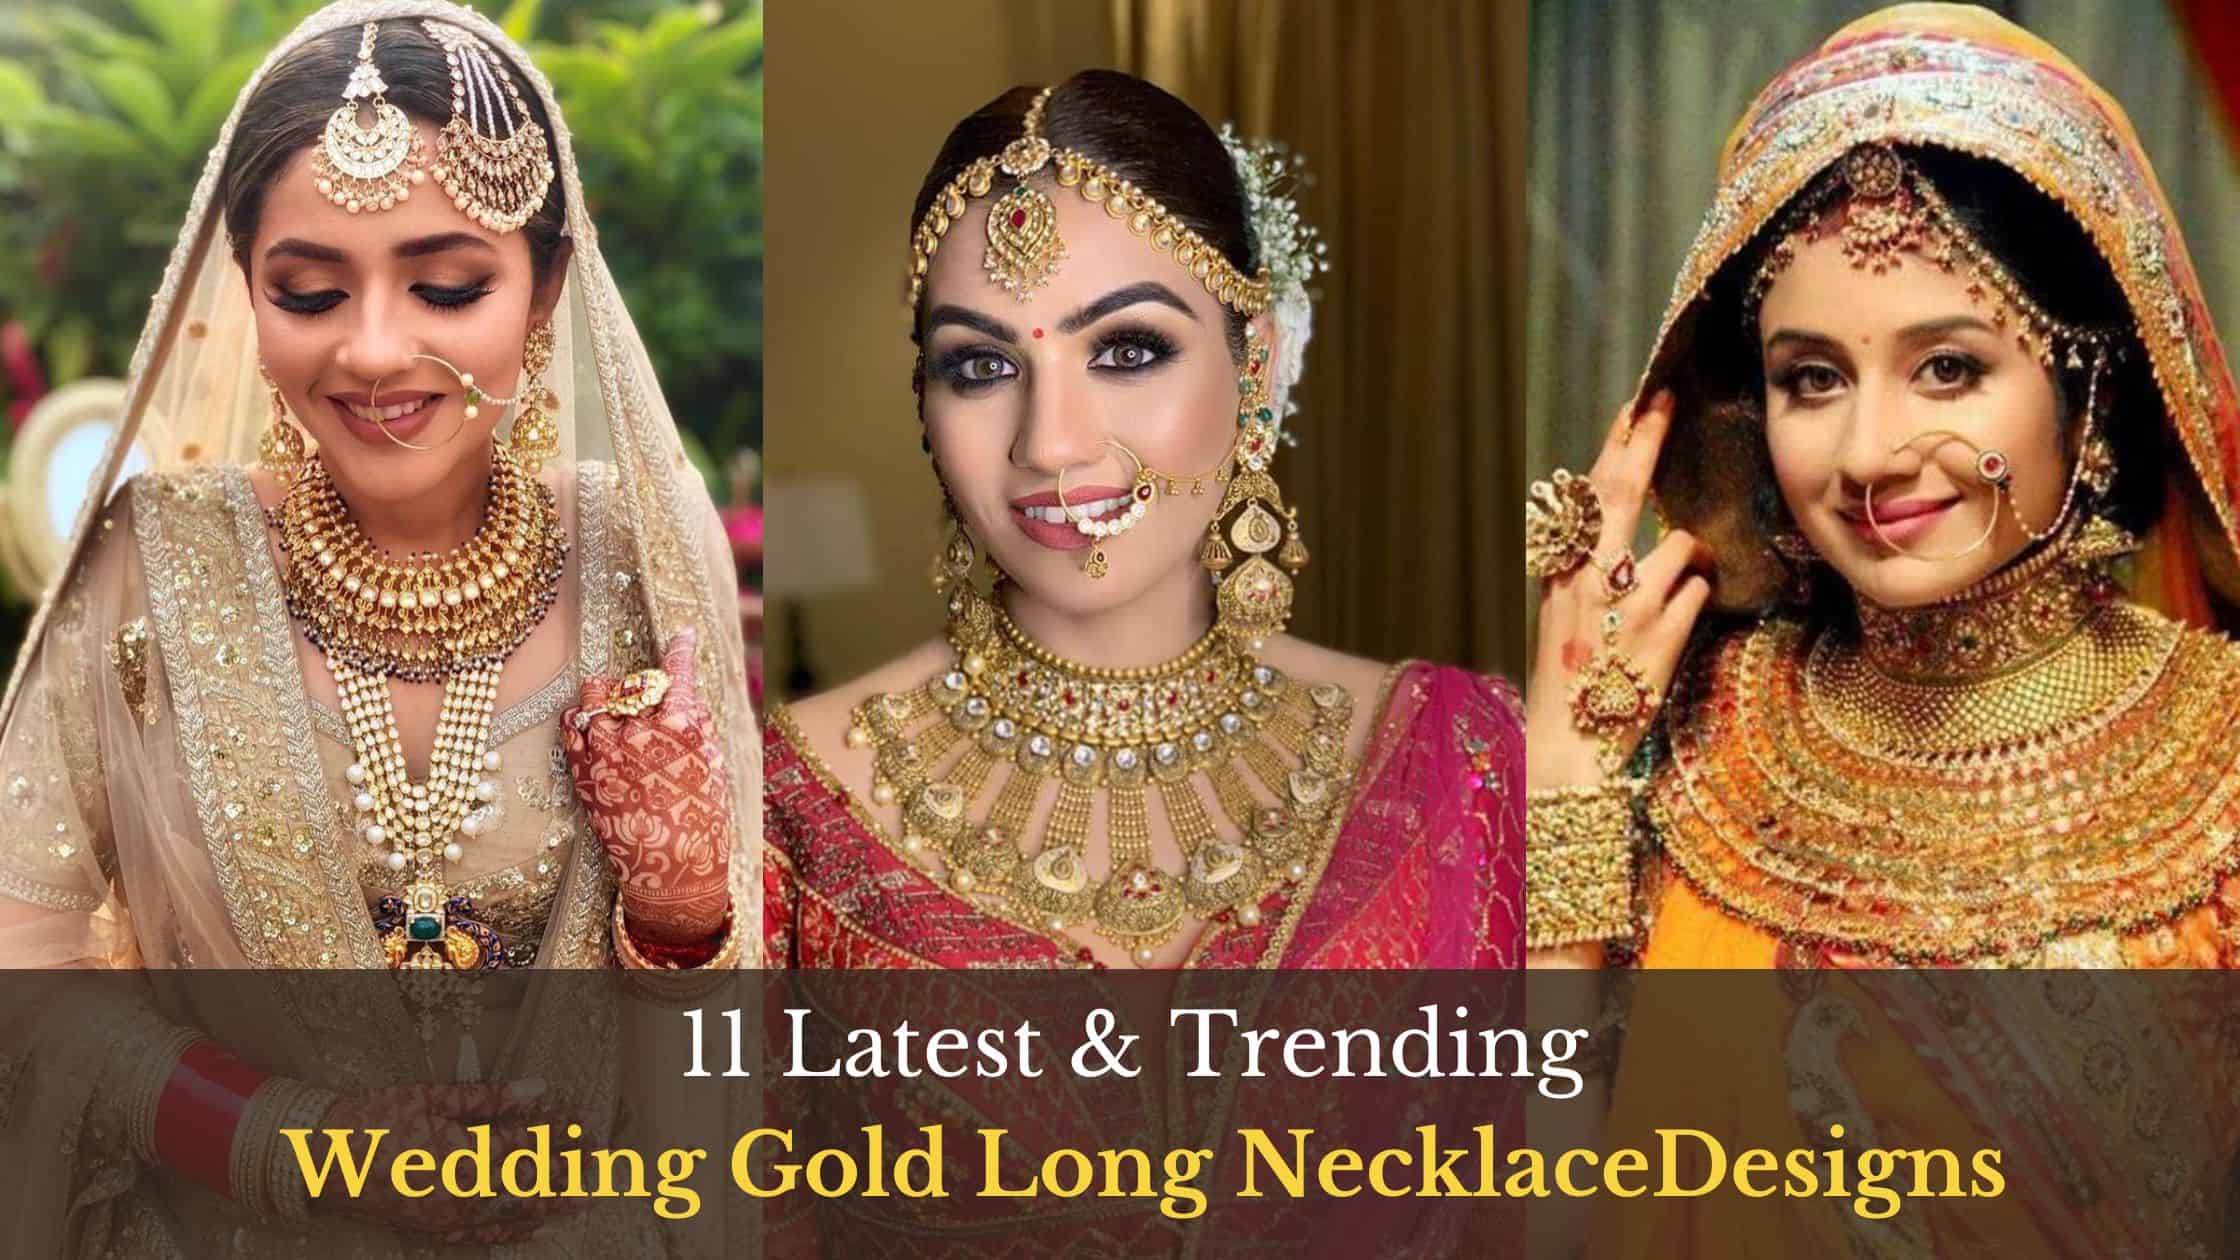 Wedding Gold Long Necklace Designs